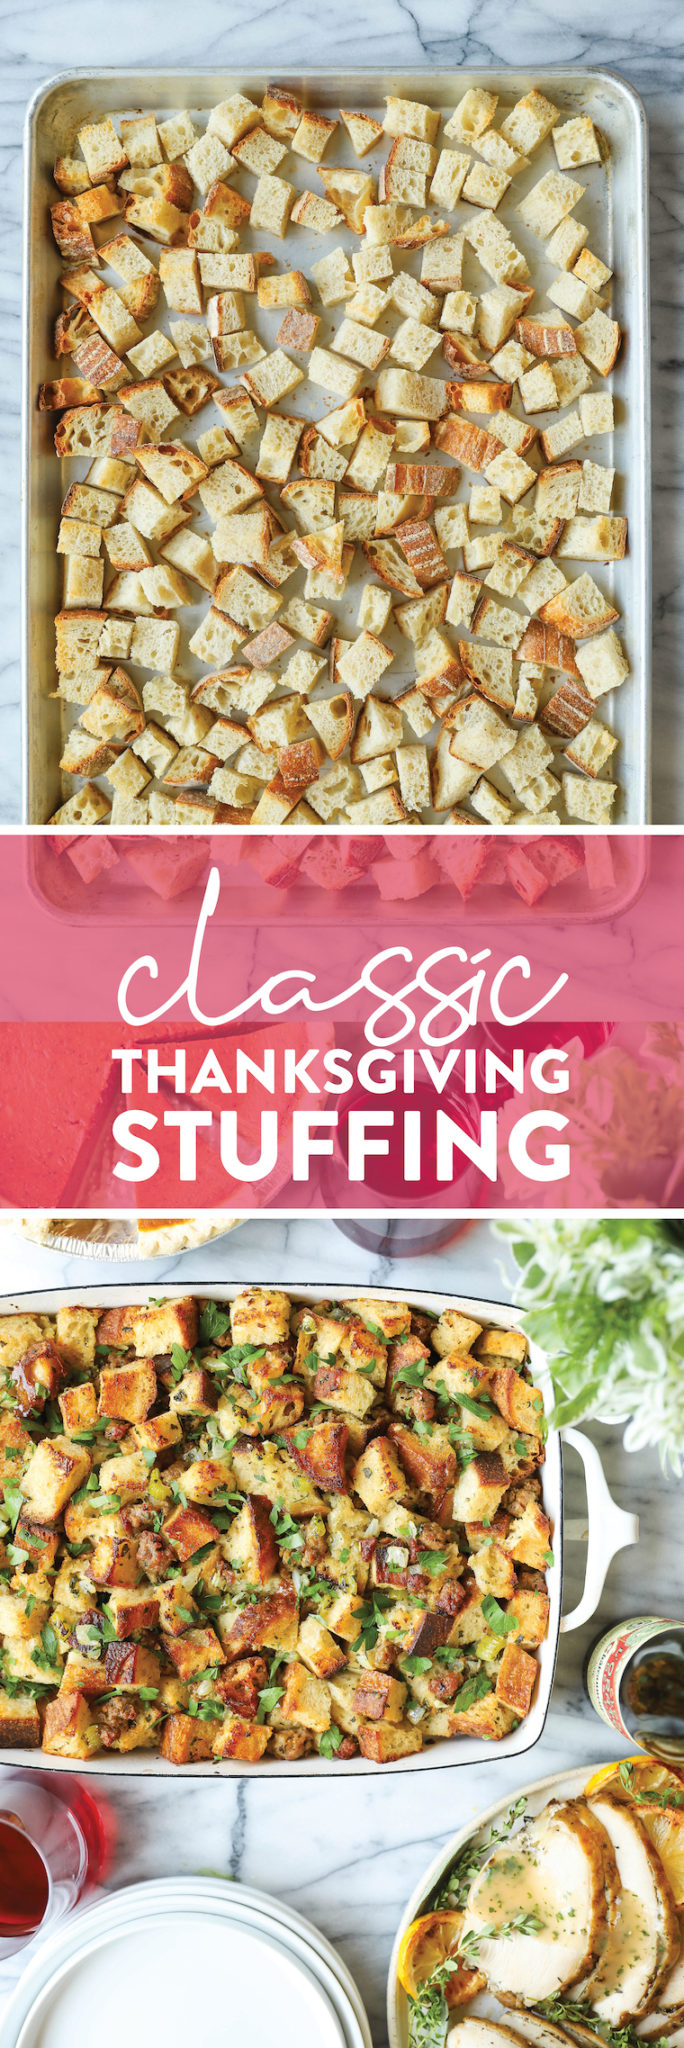 Classic Thanksgiving Stuffing - Damn Delicious